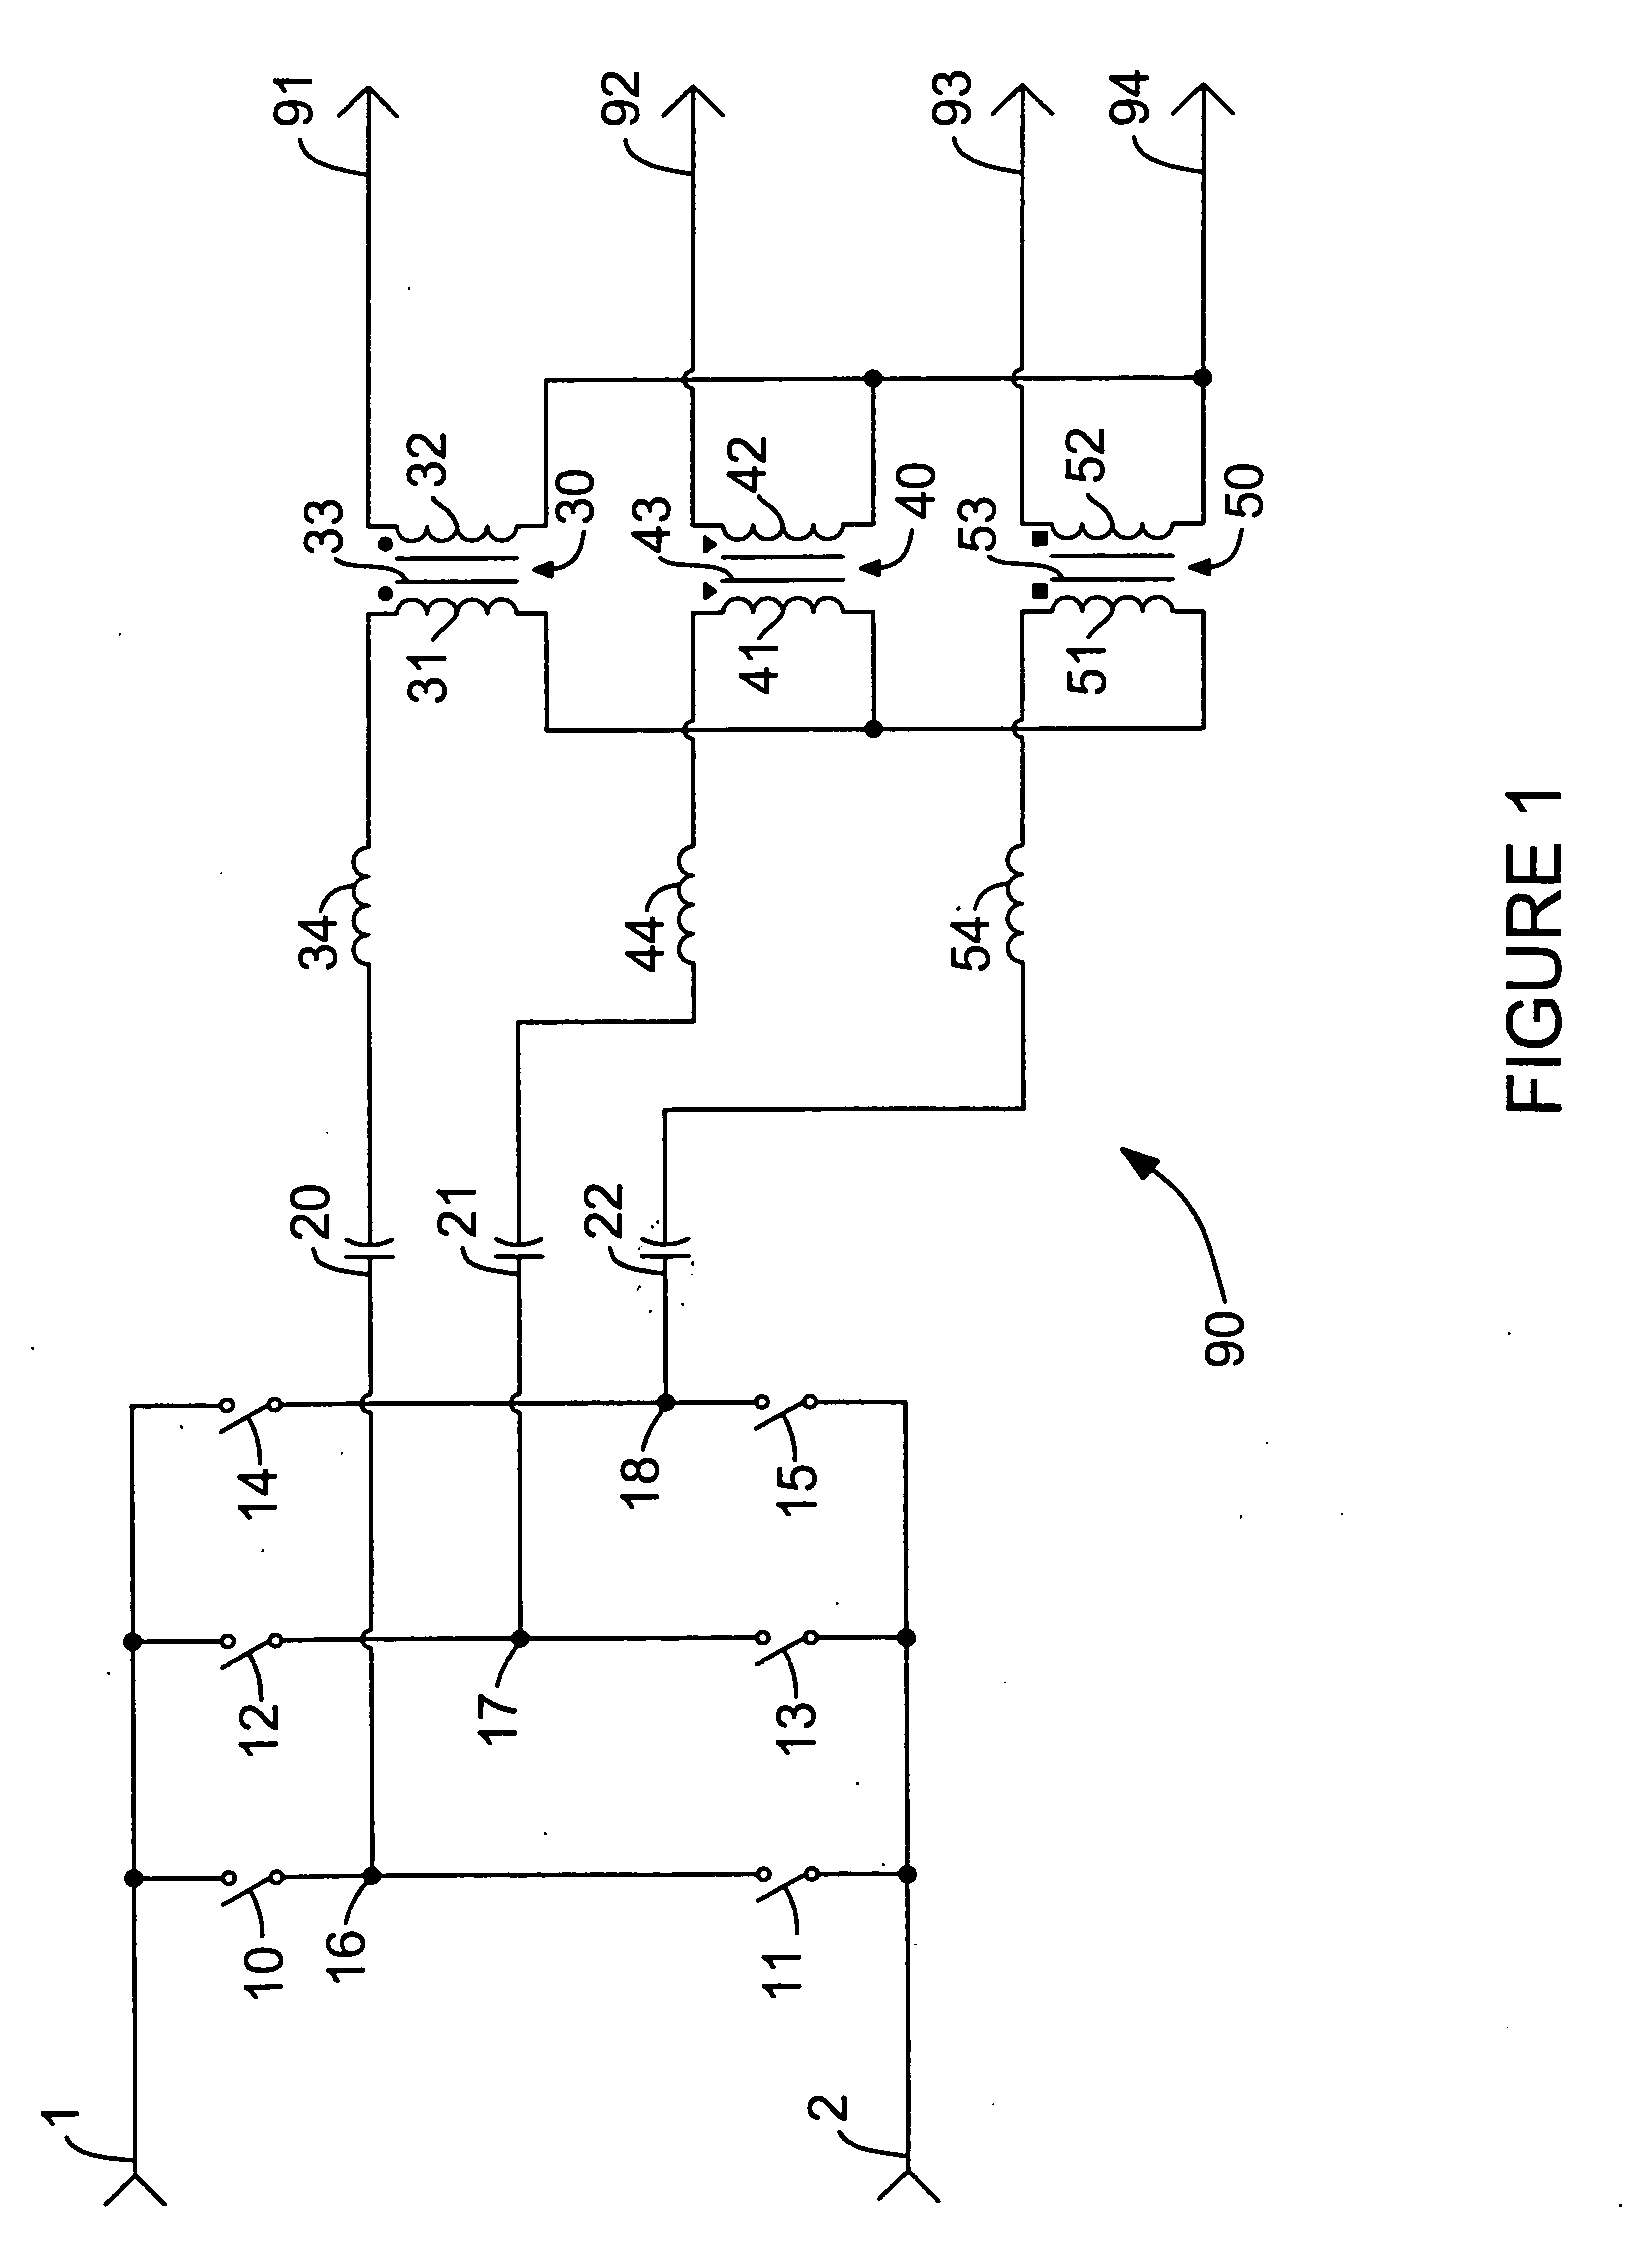 Wide range DC power supply with bypassed multiplier circuits